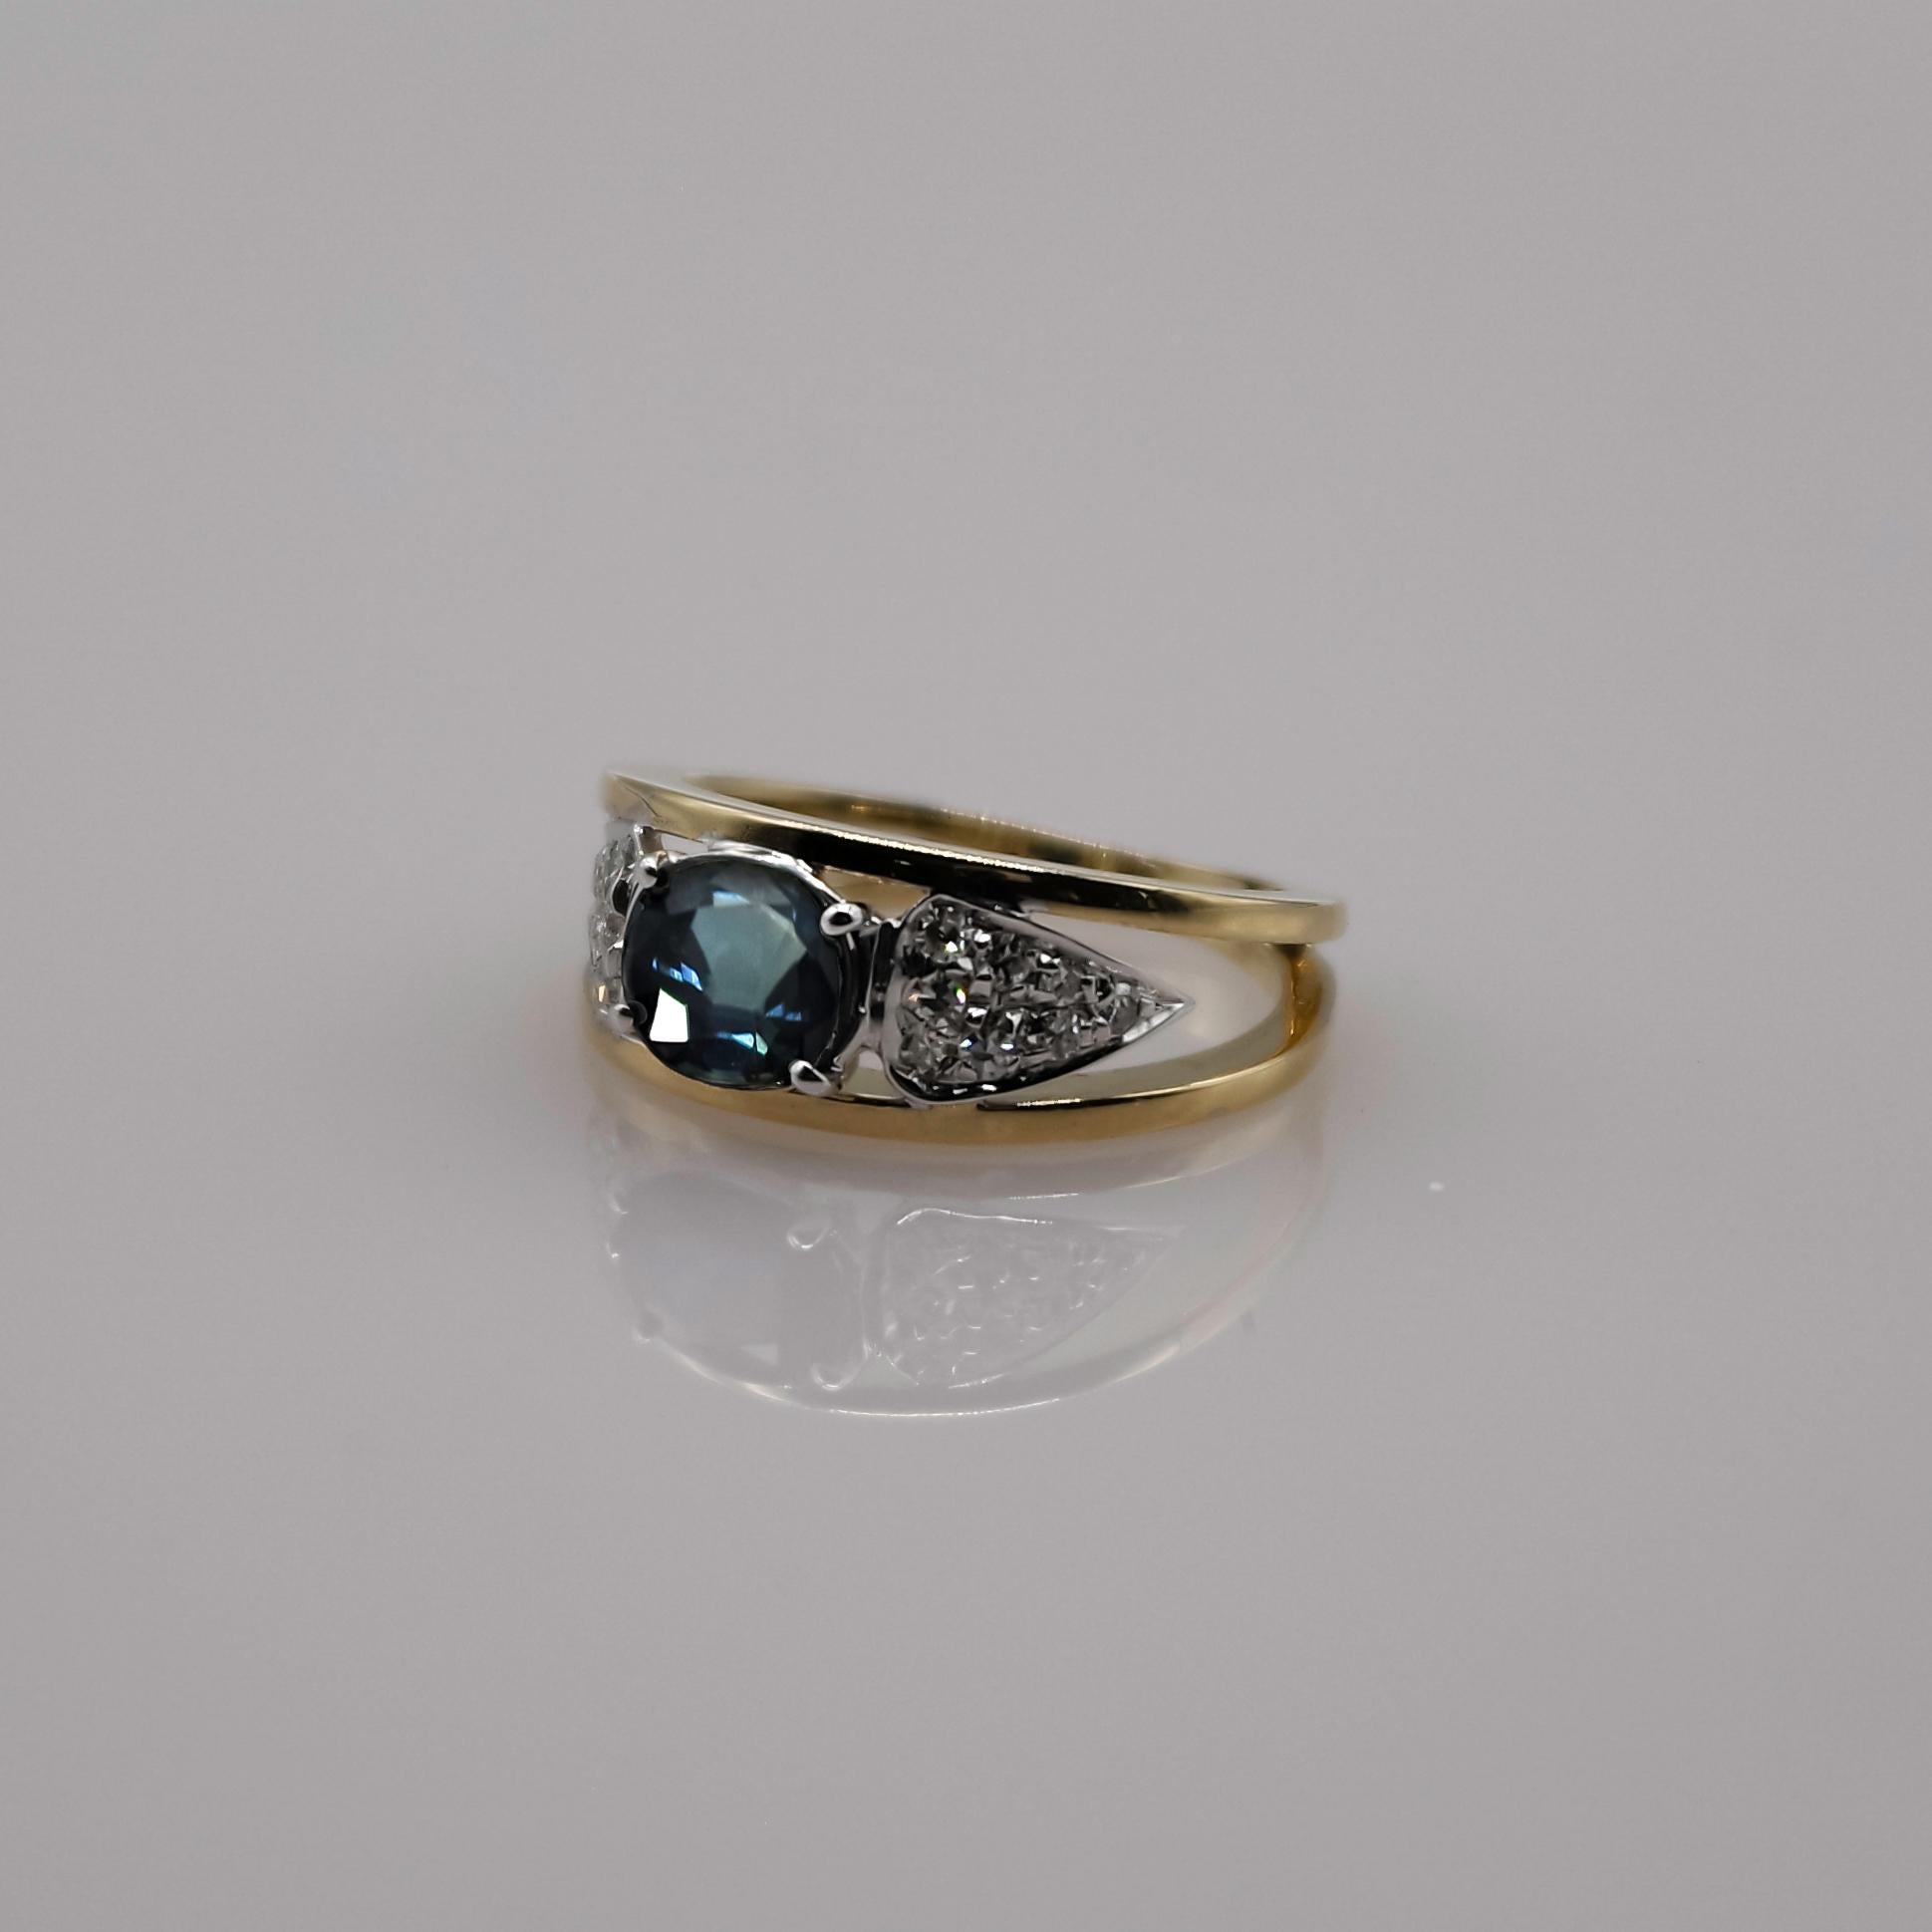 Ring in 18 Karat yellow and white gold, with a beautiful dark greenish blue and trasparent sapphire, well set with 4 prongs. Weight estimated at 1.00 carat.

The central stone is surrunded by 16 round brilliant diamonds pavé set in 18 karat white